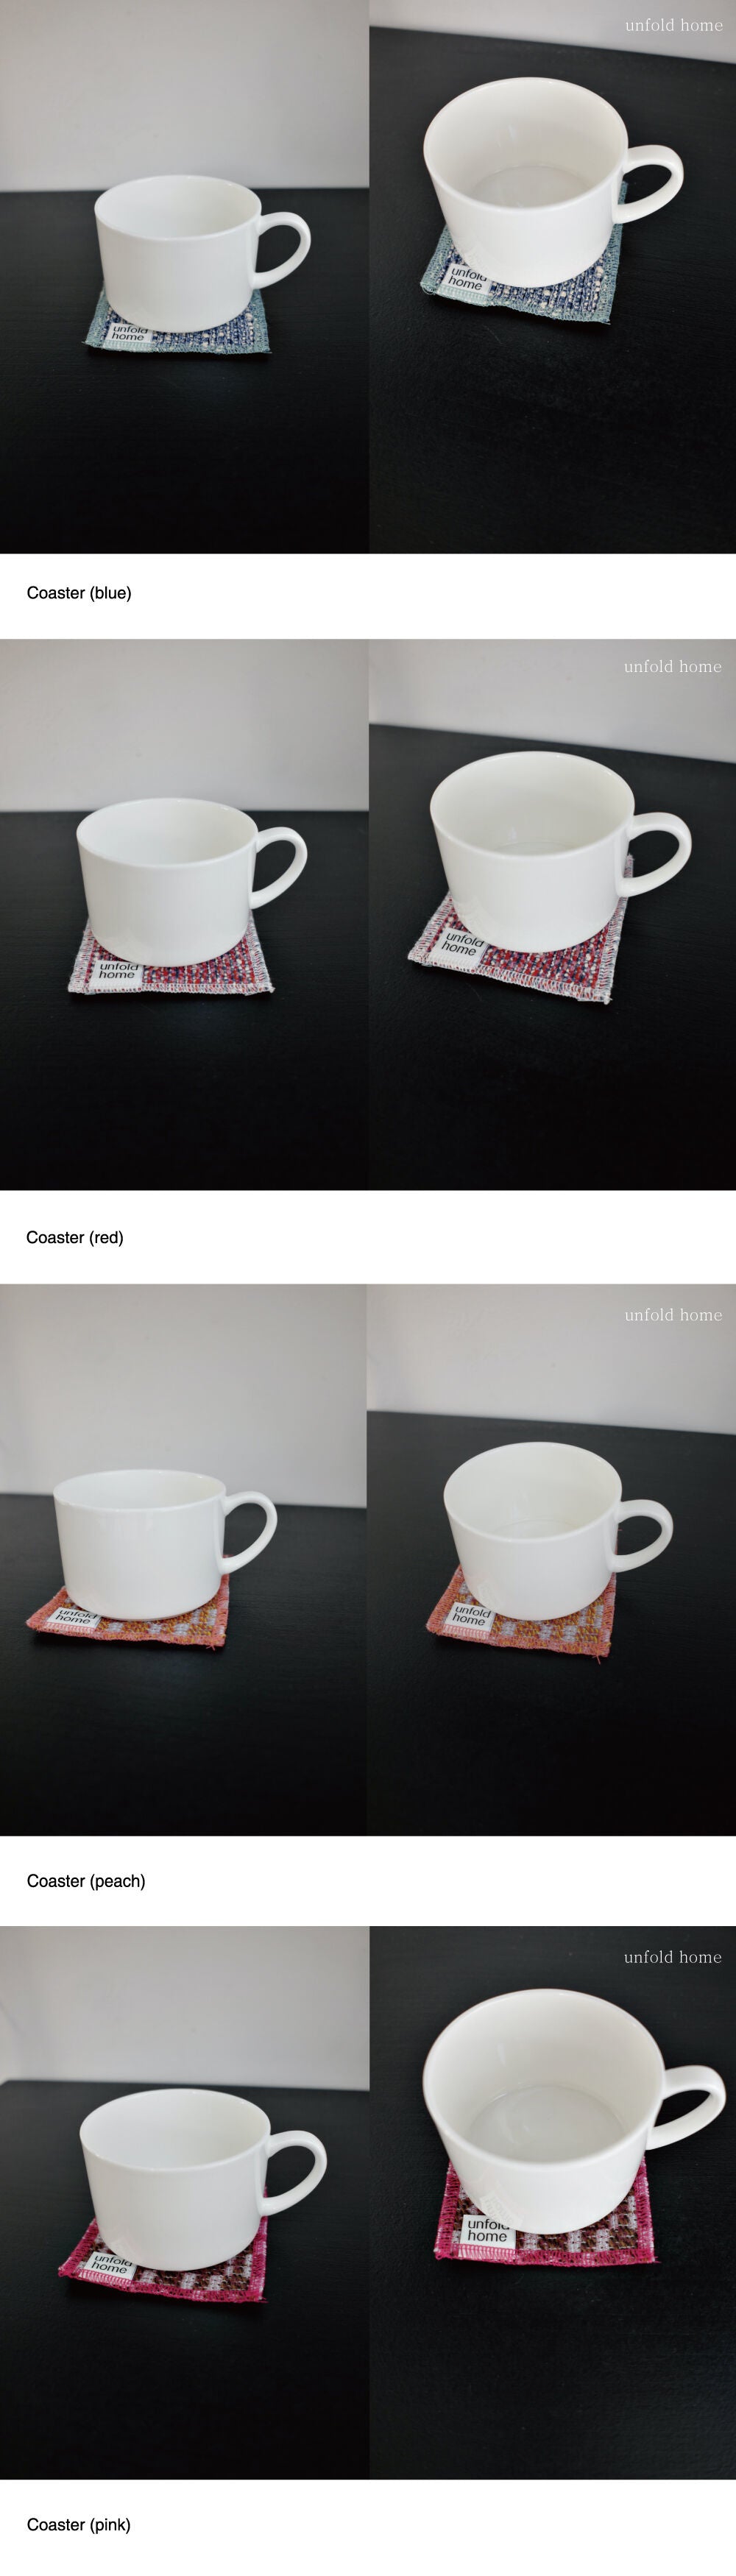 [unfold home] coaster (4colors)